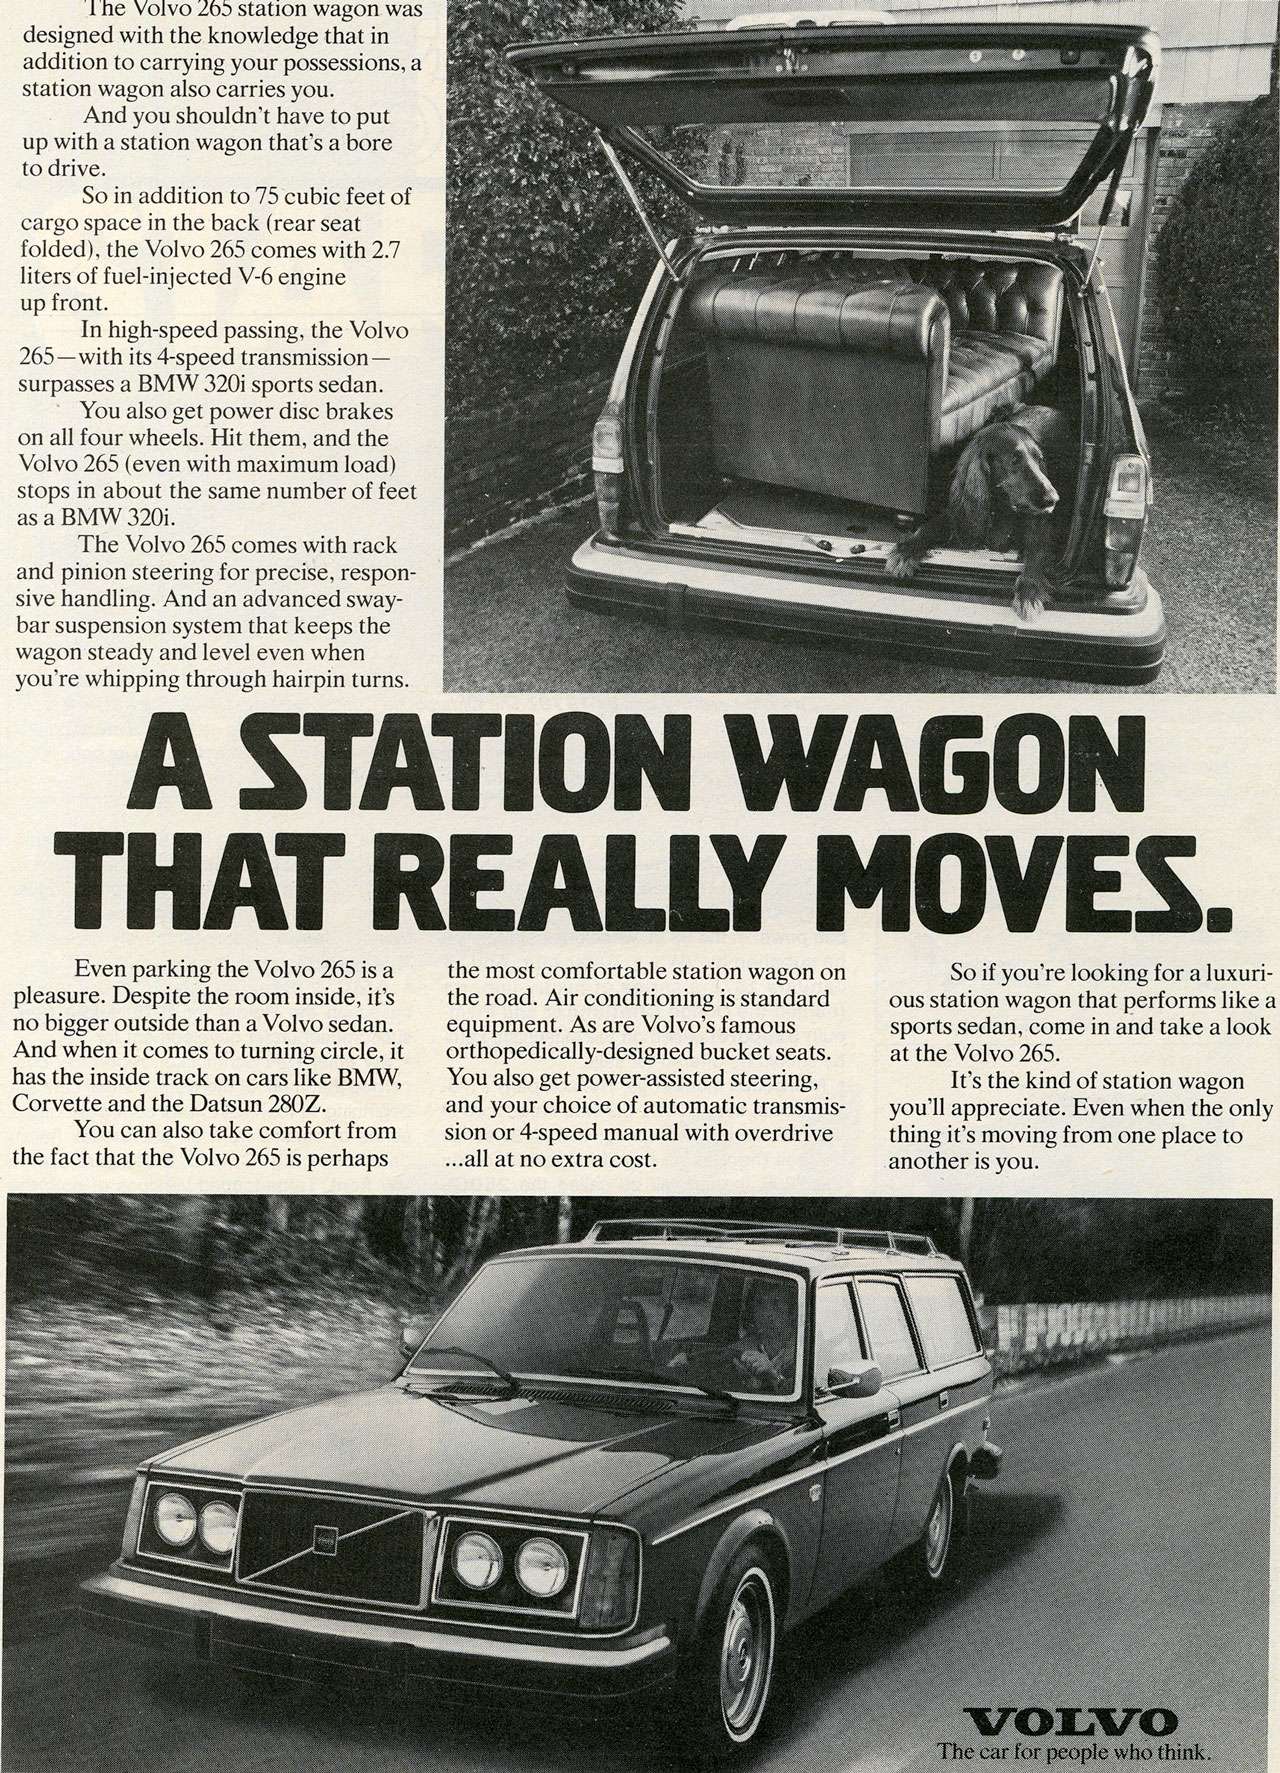 The Volvo 265 station wagon was designed with the knowledge that in addition to carrying your possessions, a station wagon also carries you. And you shouldn't have to put up with a station wagon that's a bore to drive. So in addition to 75 cubic feet of cargo space in the back (rear seat folded), the Volvo 265 comes with 2.7 liters of fuel-injected V-6 engine up front. In high-speed passing, the Volvo 265—with its 4-speed transmission—surpasses a BMW 320i sports sedan. ' You also get power disc brakes on all four wheels. Hit them, and the Volvo 265 (even with maximum load) stops in about the same number of feet as a BMW 320i. The Volvo 265 comes with rack and pinion steering for precise, respon-sive handling. And an advanced sway-bar suspension system that keeps the wagon steady and level even when you're whipping through hairpin turns. A STATION WAGON THAT REALLY MOVES. Even parking the Volvo 265 is a pleasure. Despite the room inside, it's no bigger outside than a Volvo sedan. And when it comes to turning circle, it has the inside track on cars like BMW, Corvette and the Datsun 280Z. You can also take comfort from the fact that the Volvo 265 is perhaps the most comfortable station wagon on the road. Air conditioning is standard equipment. As are Volvo's famous orthopedically-designed bucket seats. You also get power-assisted steering, and your choice of automatic transmis-sion or 4-speed manual with overdrive ...all at no extra cost. So if you're looking for a luxuri-ous station wagon that performs like a sports sedan, come in and take a look at the Volvo 265. It's the kind of station wagon you'll appreciate. Even when the only thing it's moving from one place to another is you. The car for people who think.